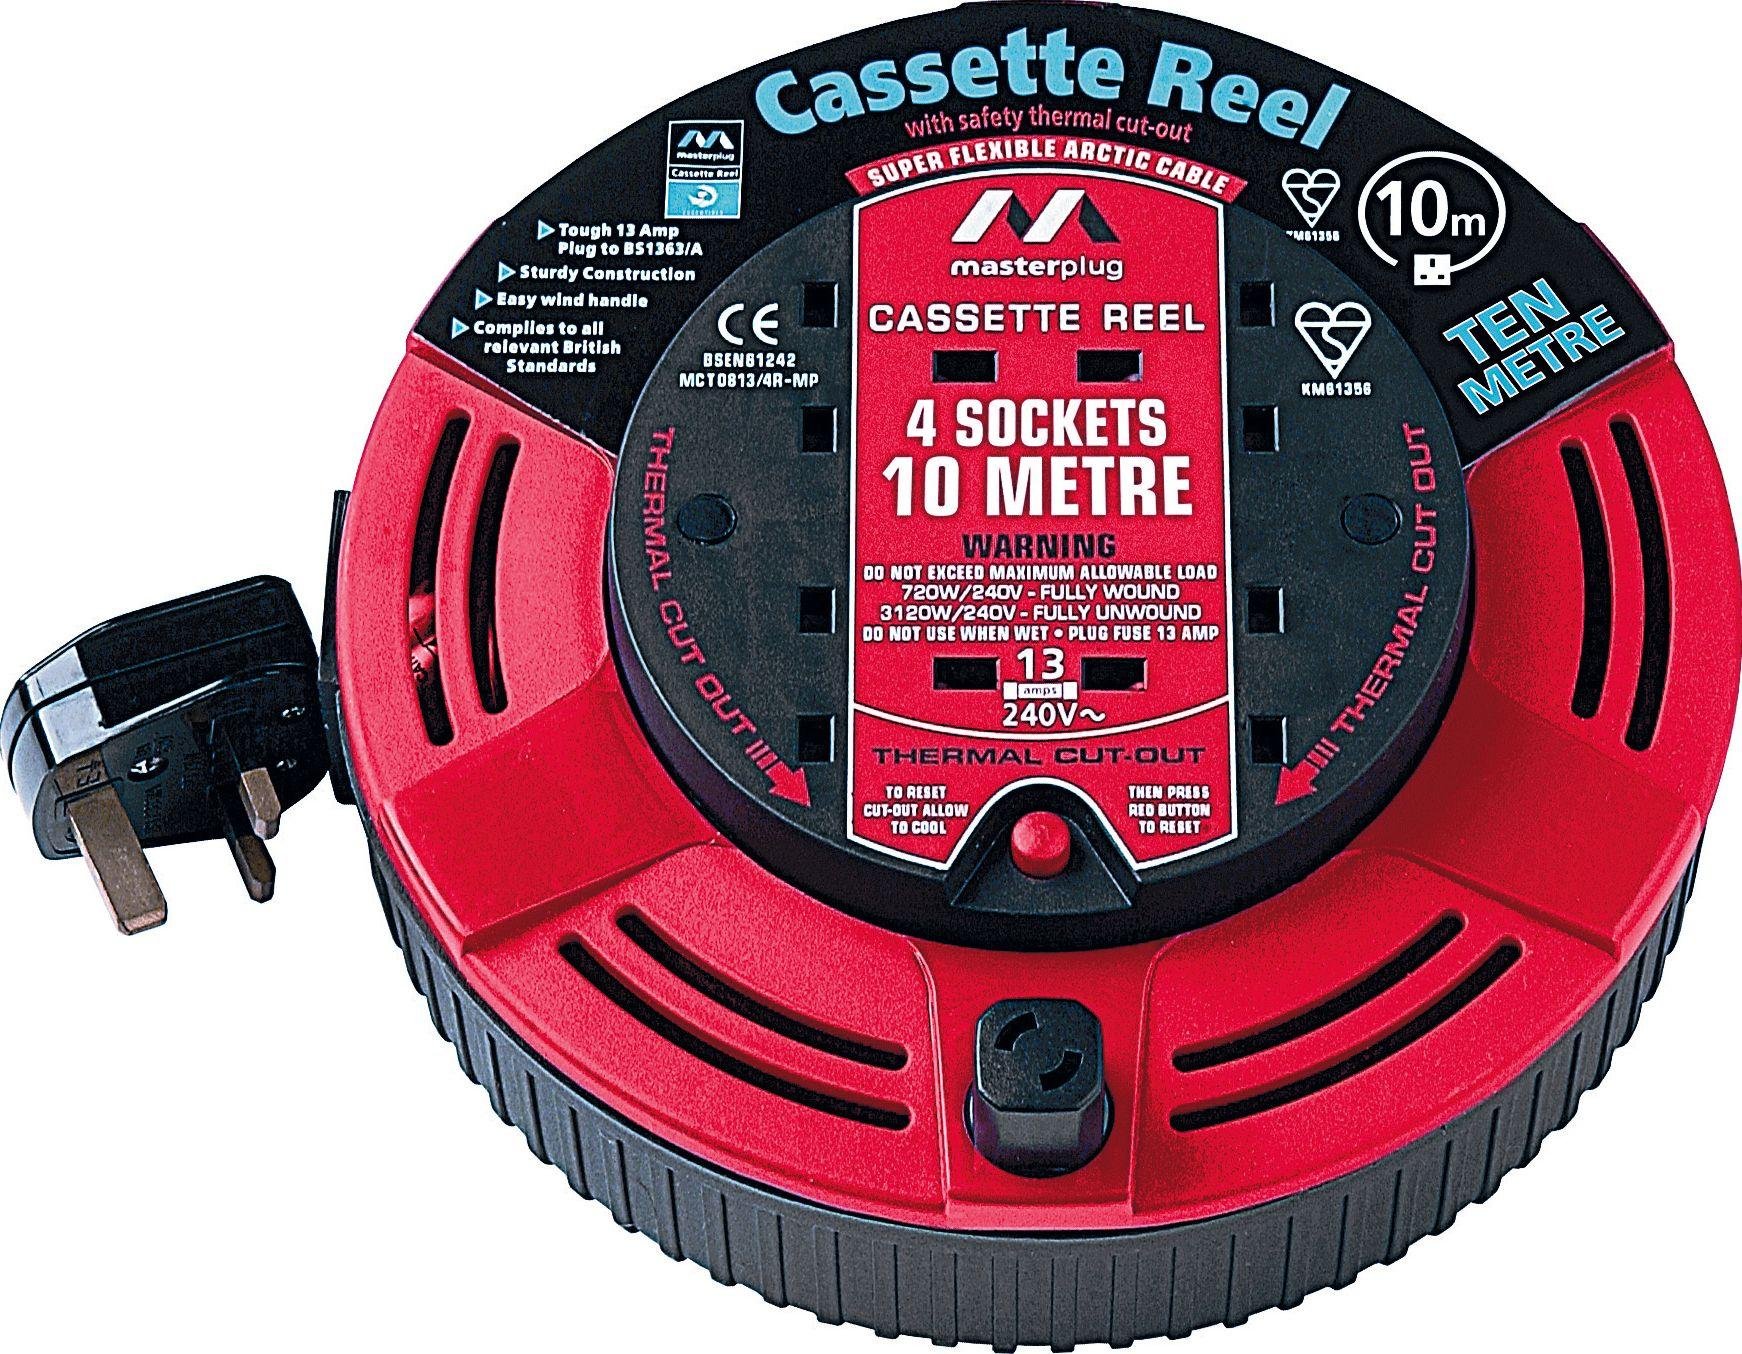 Masterplug - 4 Socket Cable Reel - 10m Review